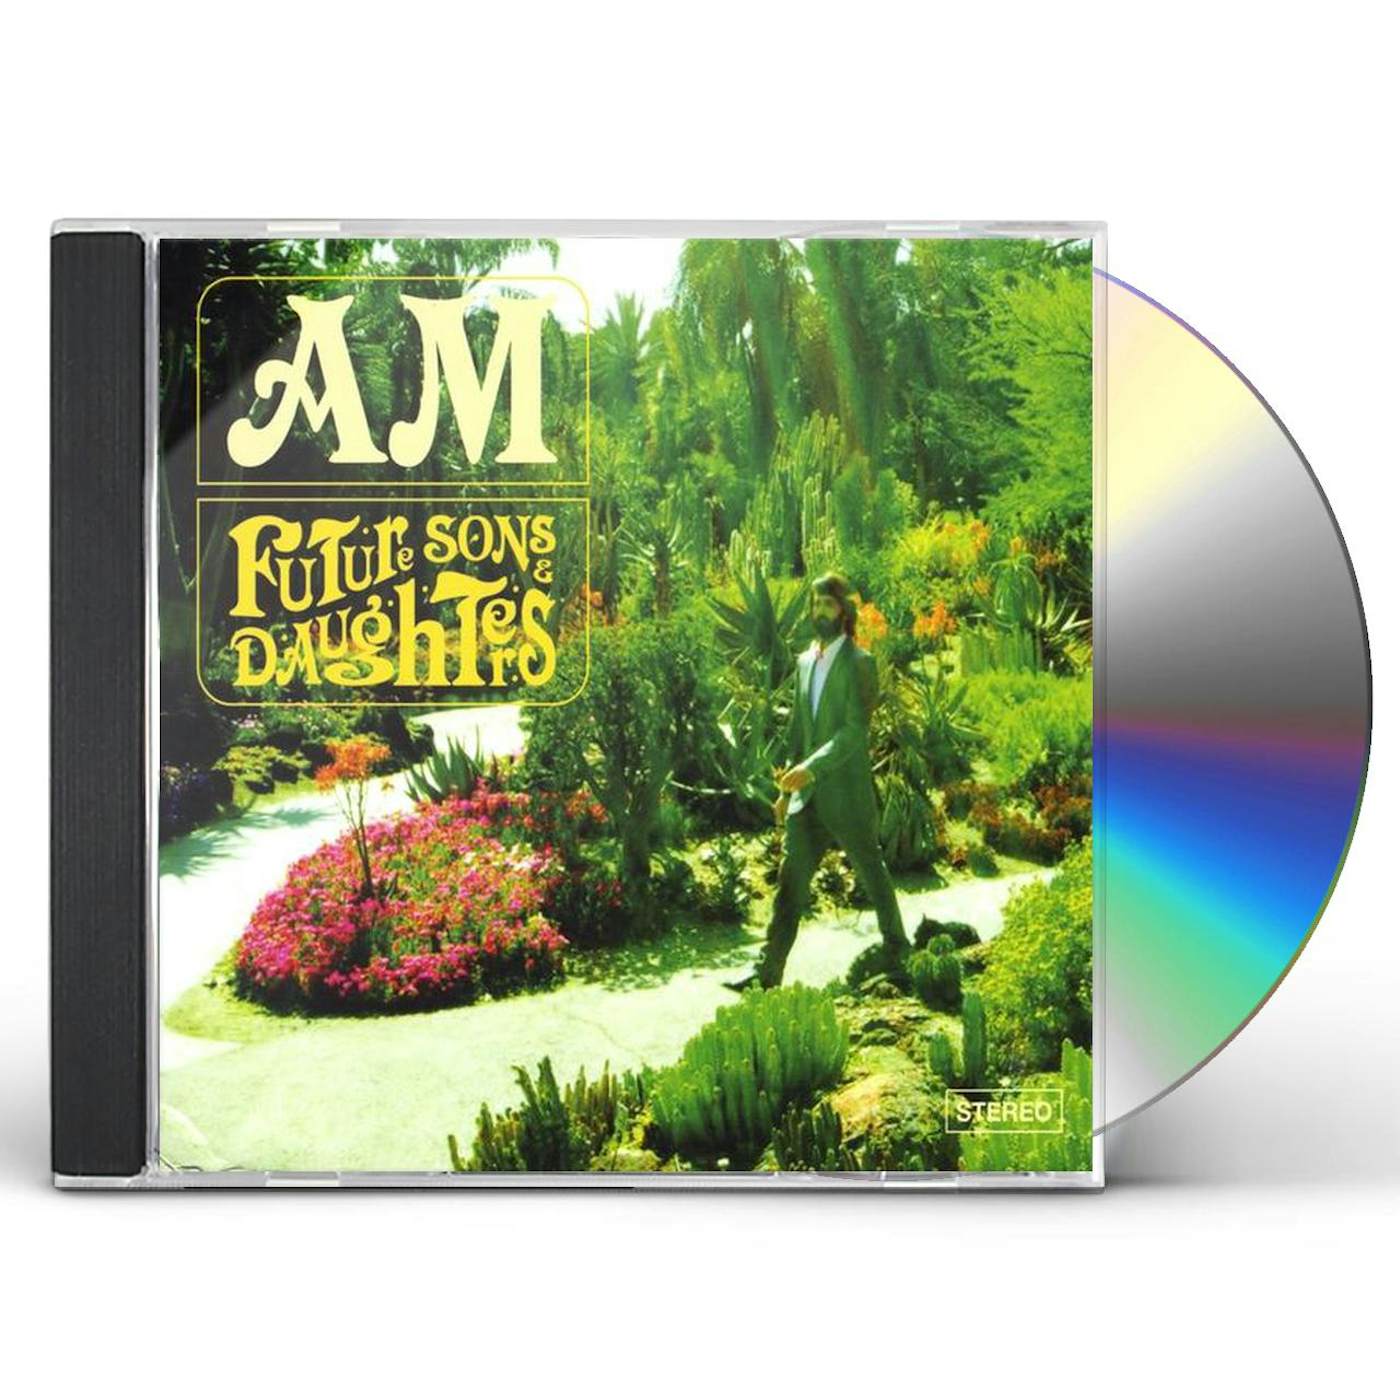 AM FUTURE SONS & DAUGHTERS CD